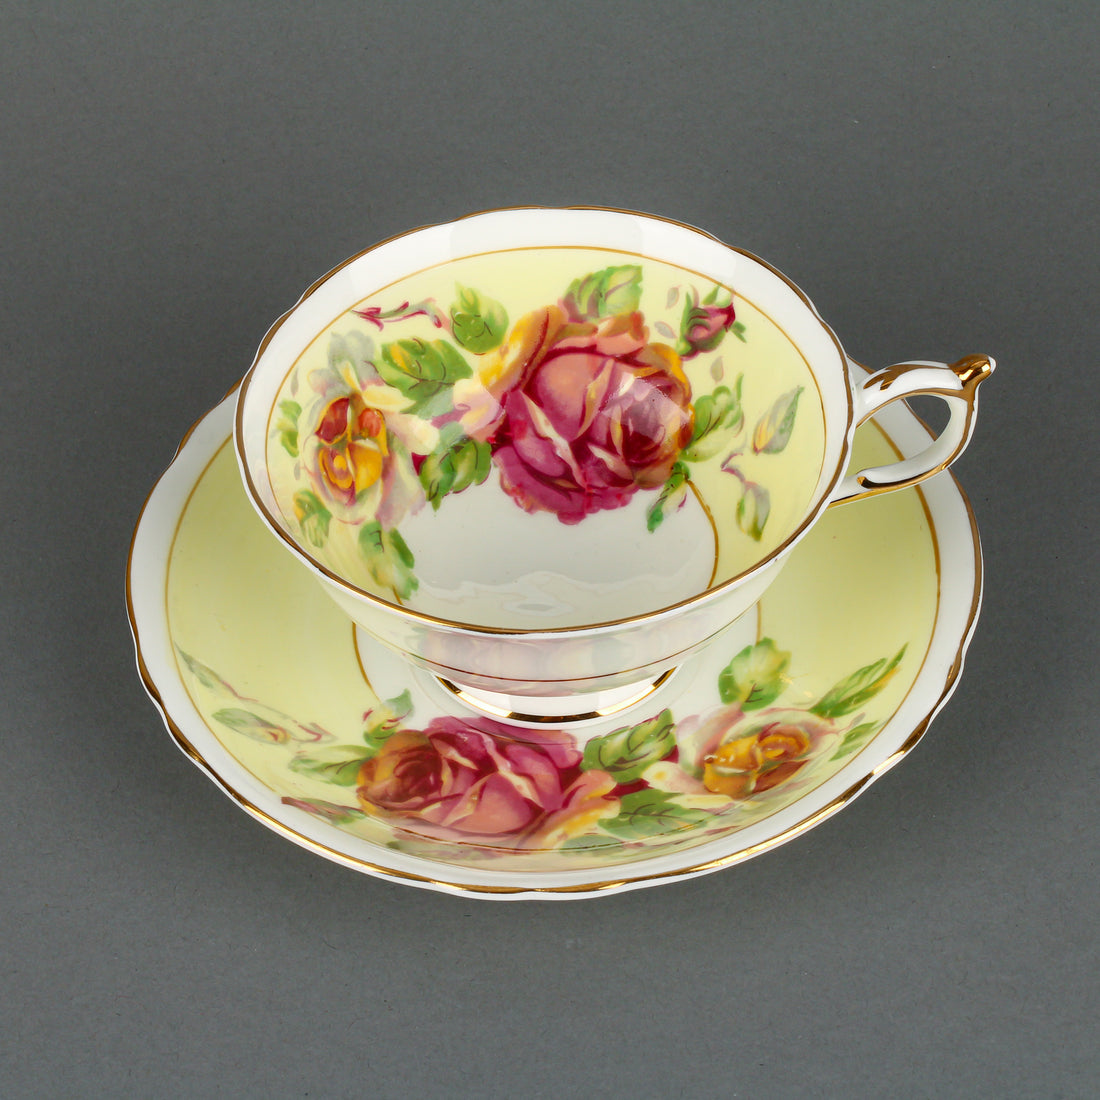 PARAGON Hand-Painted Roses Cup & Saucer